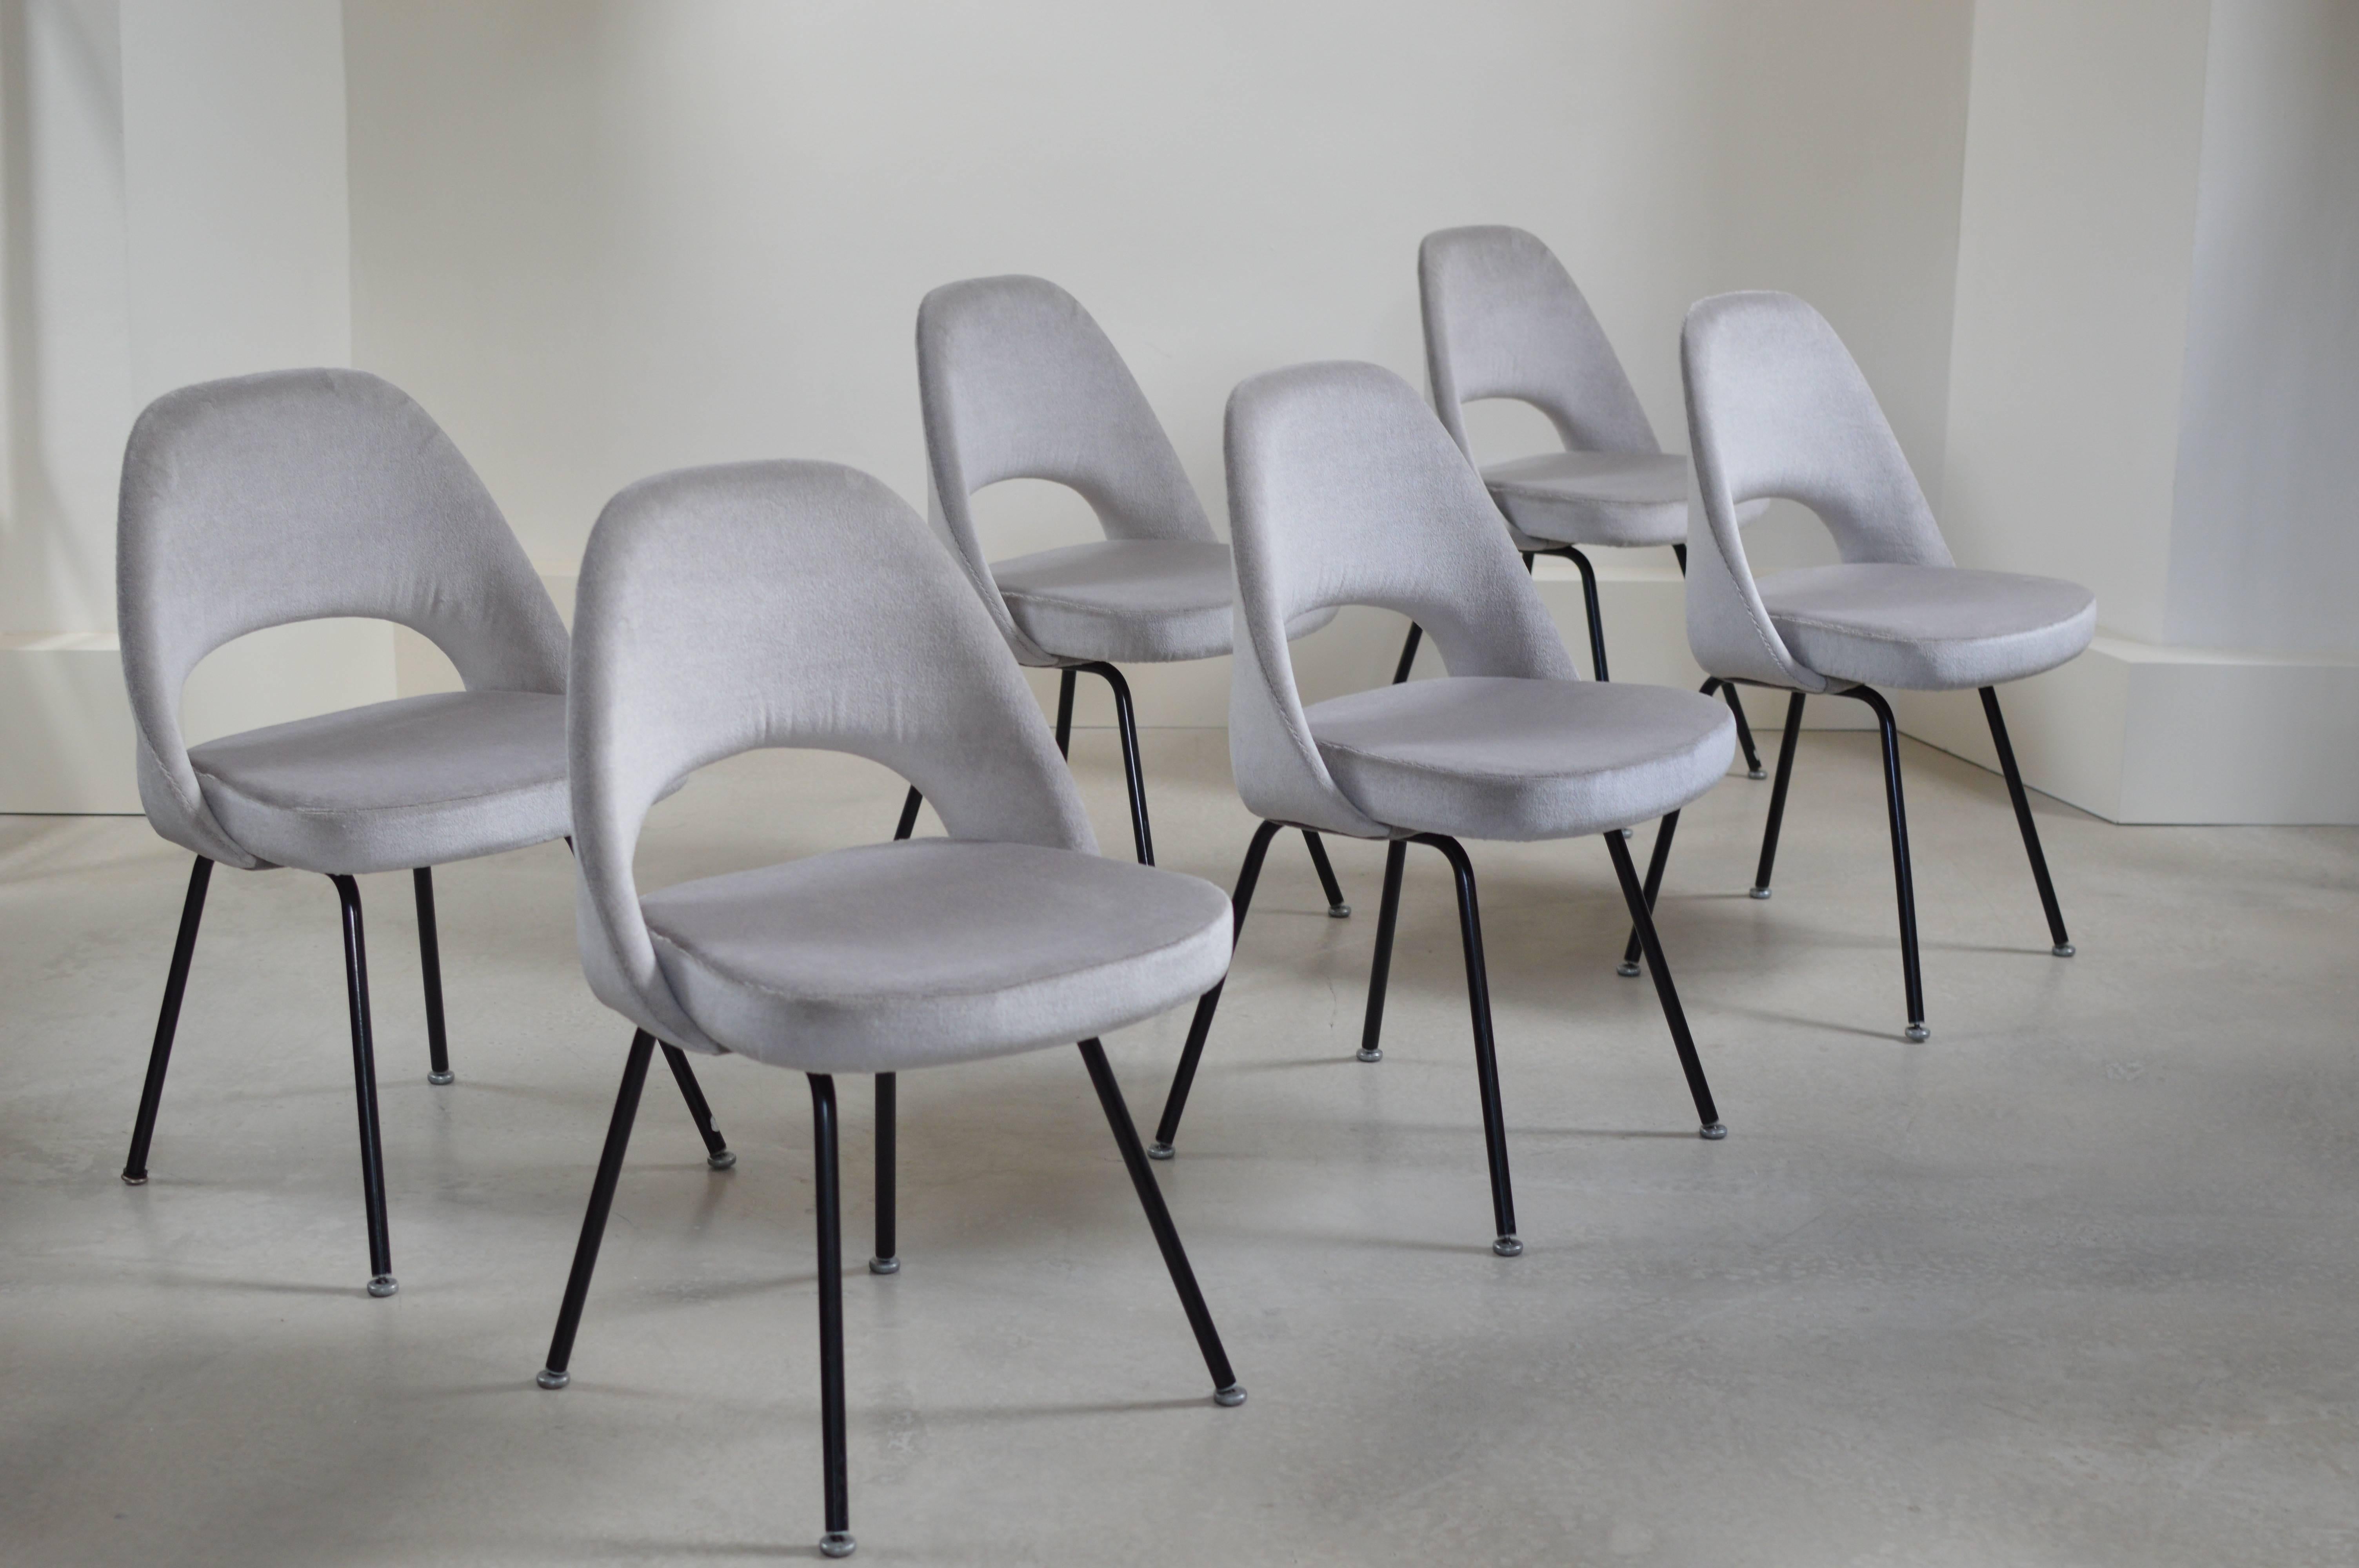 Set of six (6) model 71 series chairs by Eero Saarinen for Knoll International. Chairs date from early 1950s production series and have been completely restored and reupholstered in a gorgeous grey mohair and silk fabric. 

